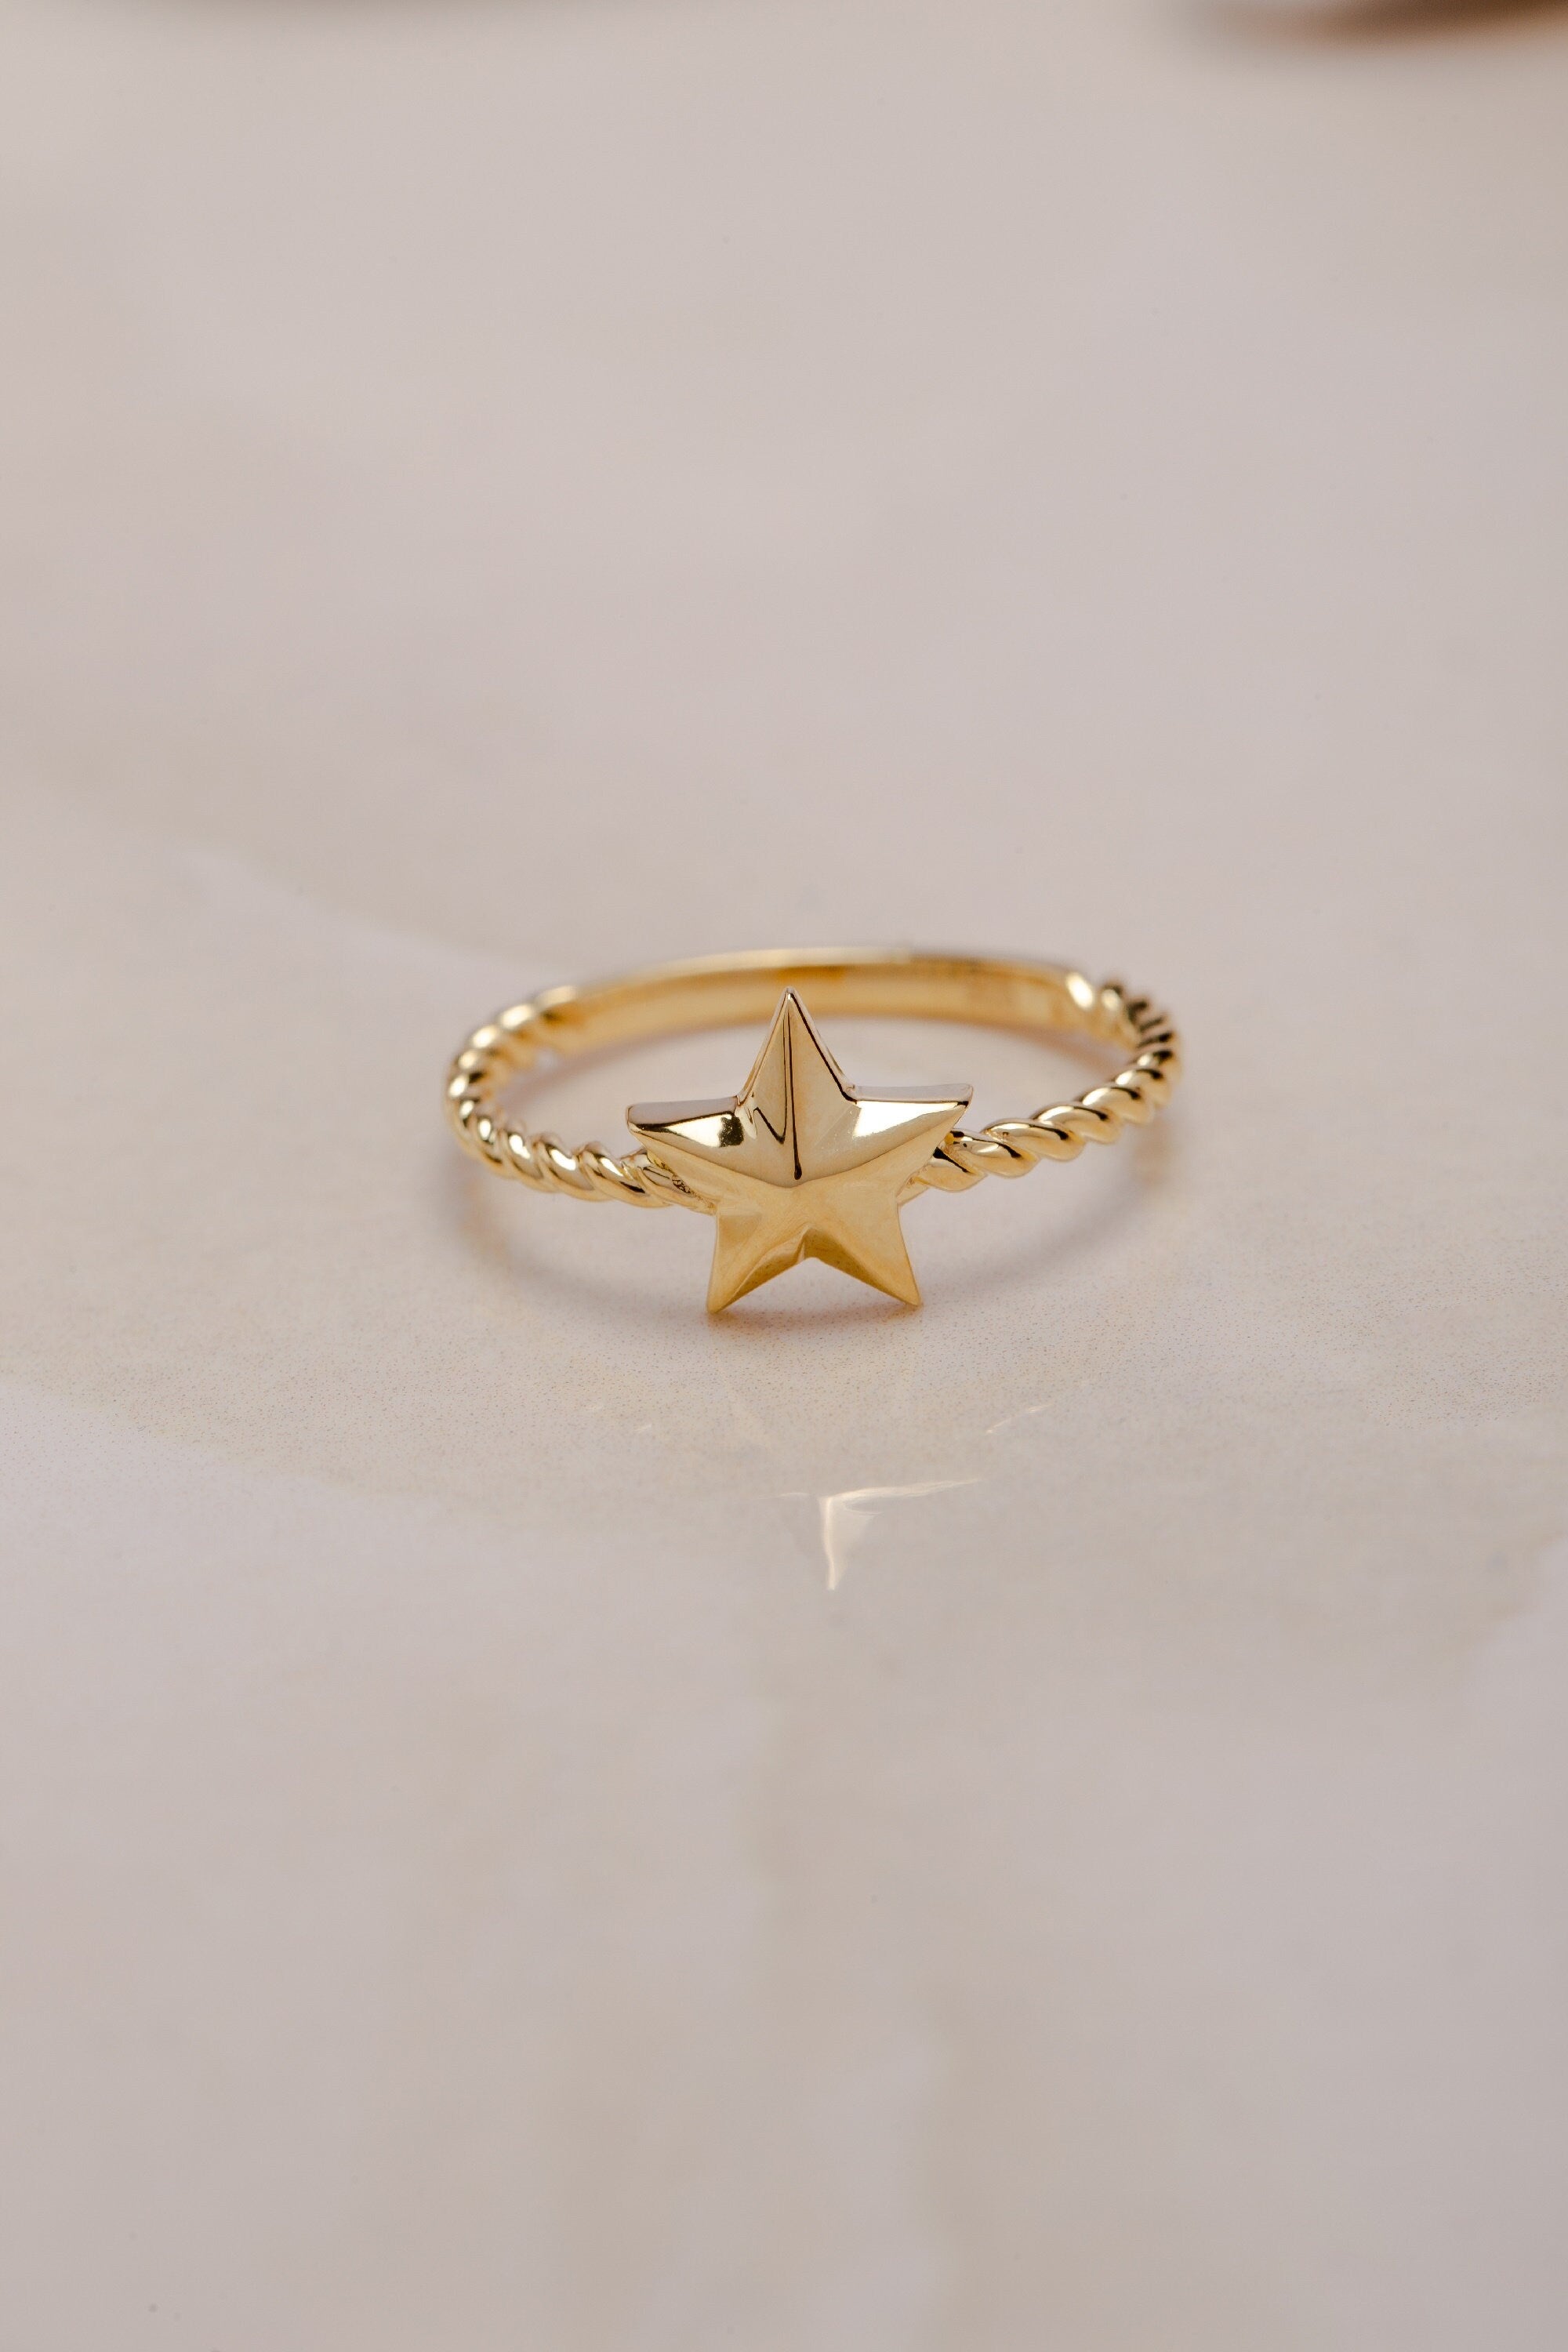 14K Gold Star Ring, Dainty Star Ring, Golden Ring, Galaxy Ring, Delicate Star Ring, Gift For Mother Day, Mother Day Jewelry, Gift for Her